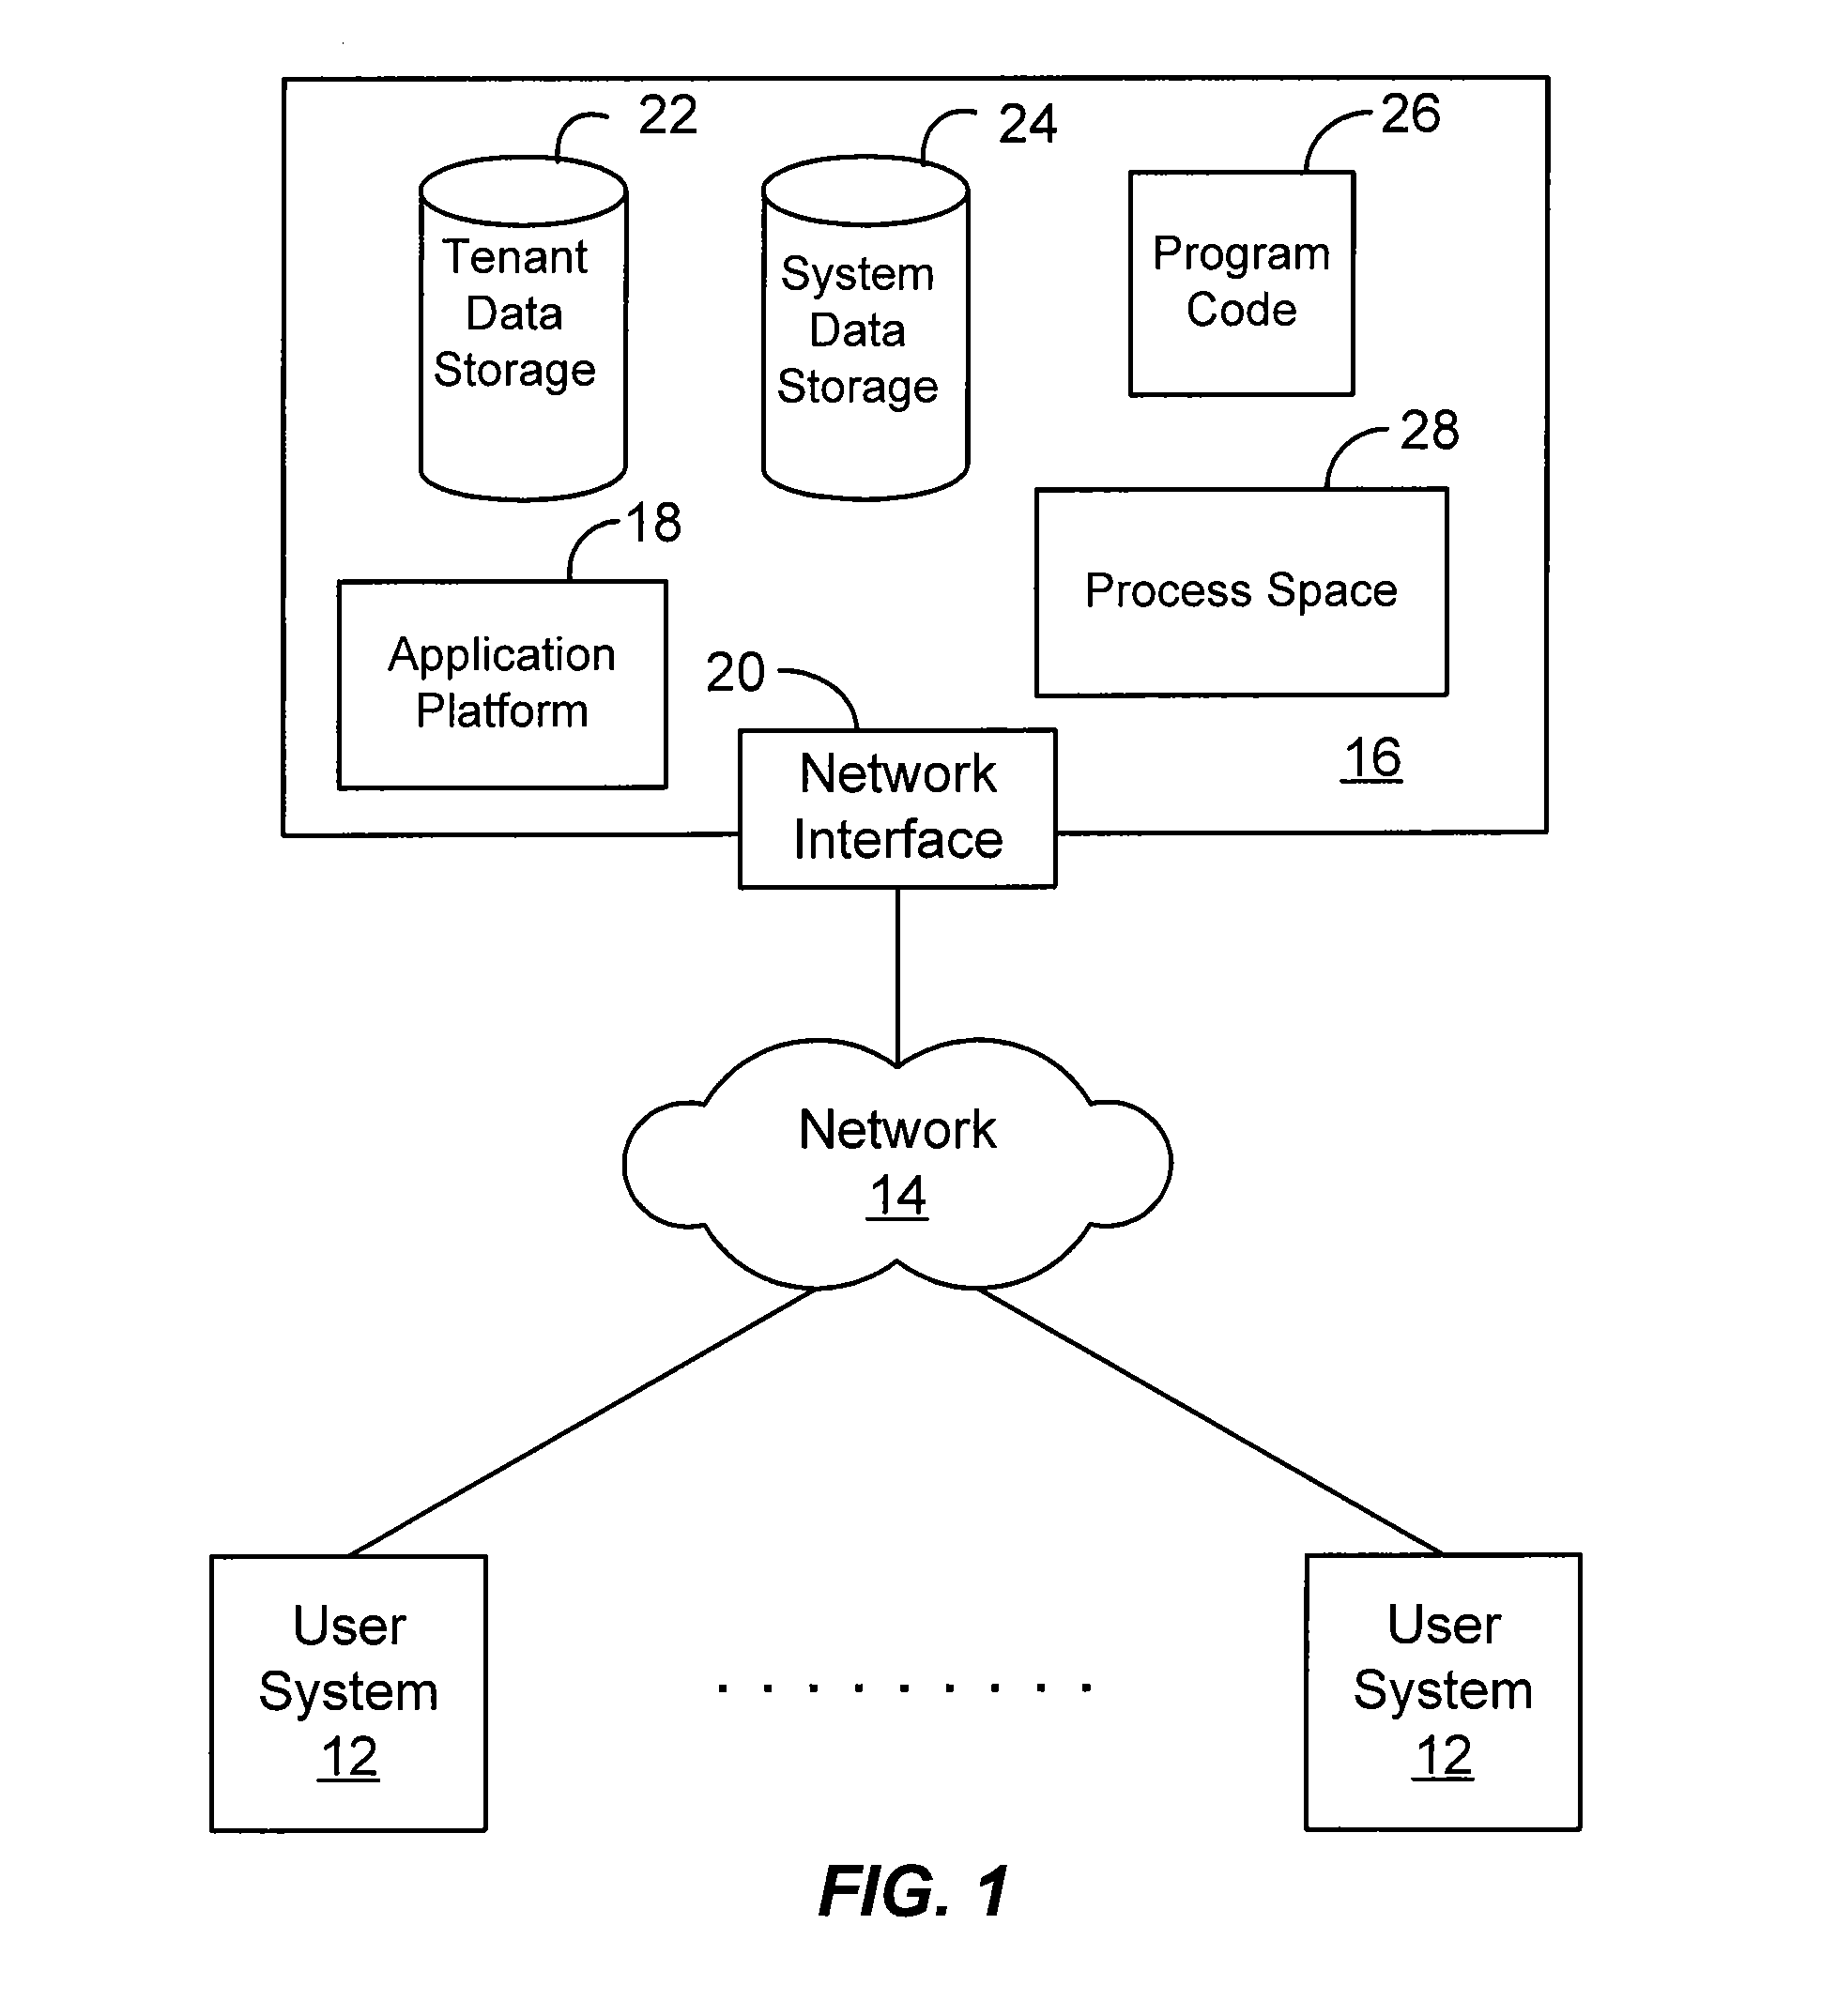 Systems and methods for implementing many object to object relationships in a multi-tenant environment